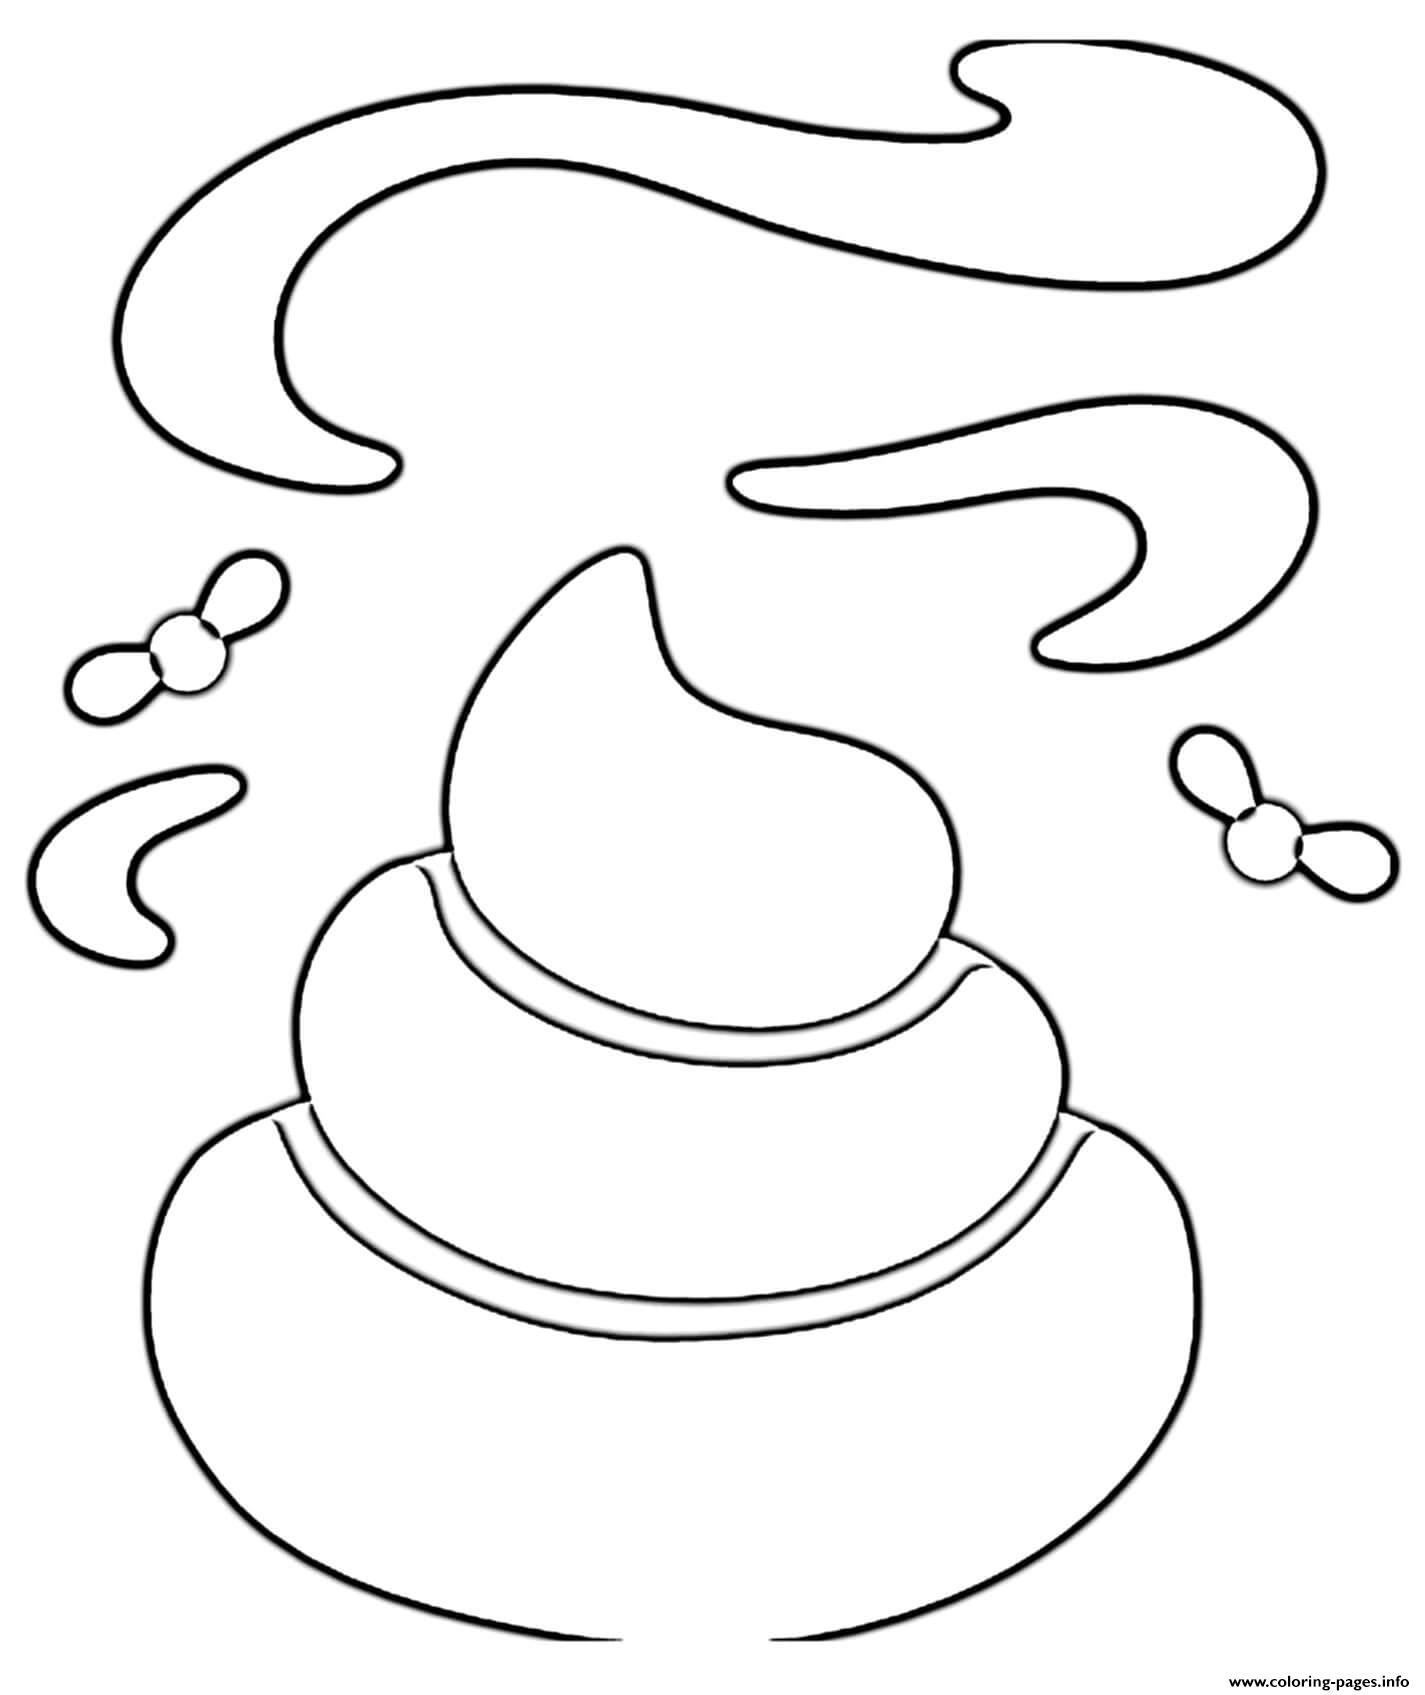 Coloring Pages : Coloring Pages Ideas Emoji Poop Photo ...